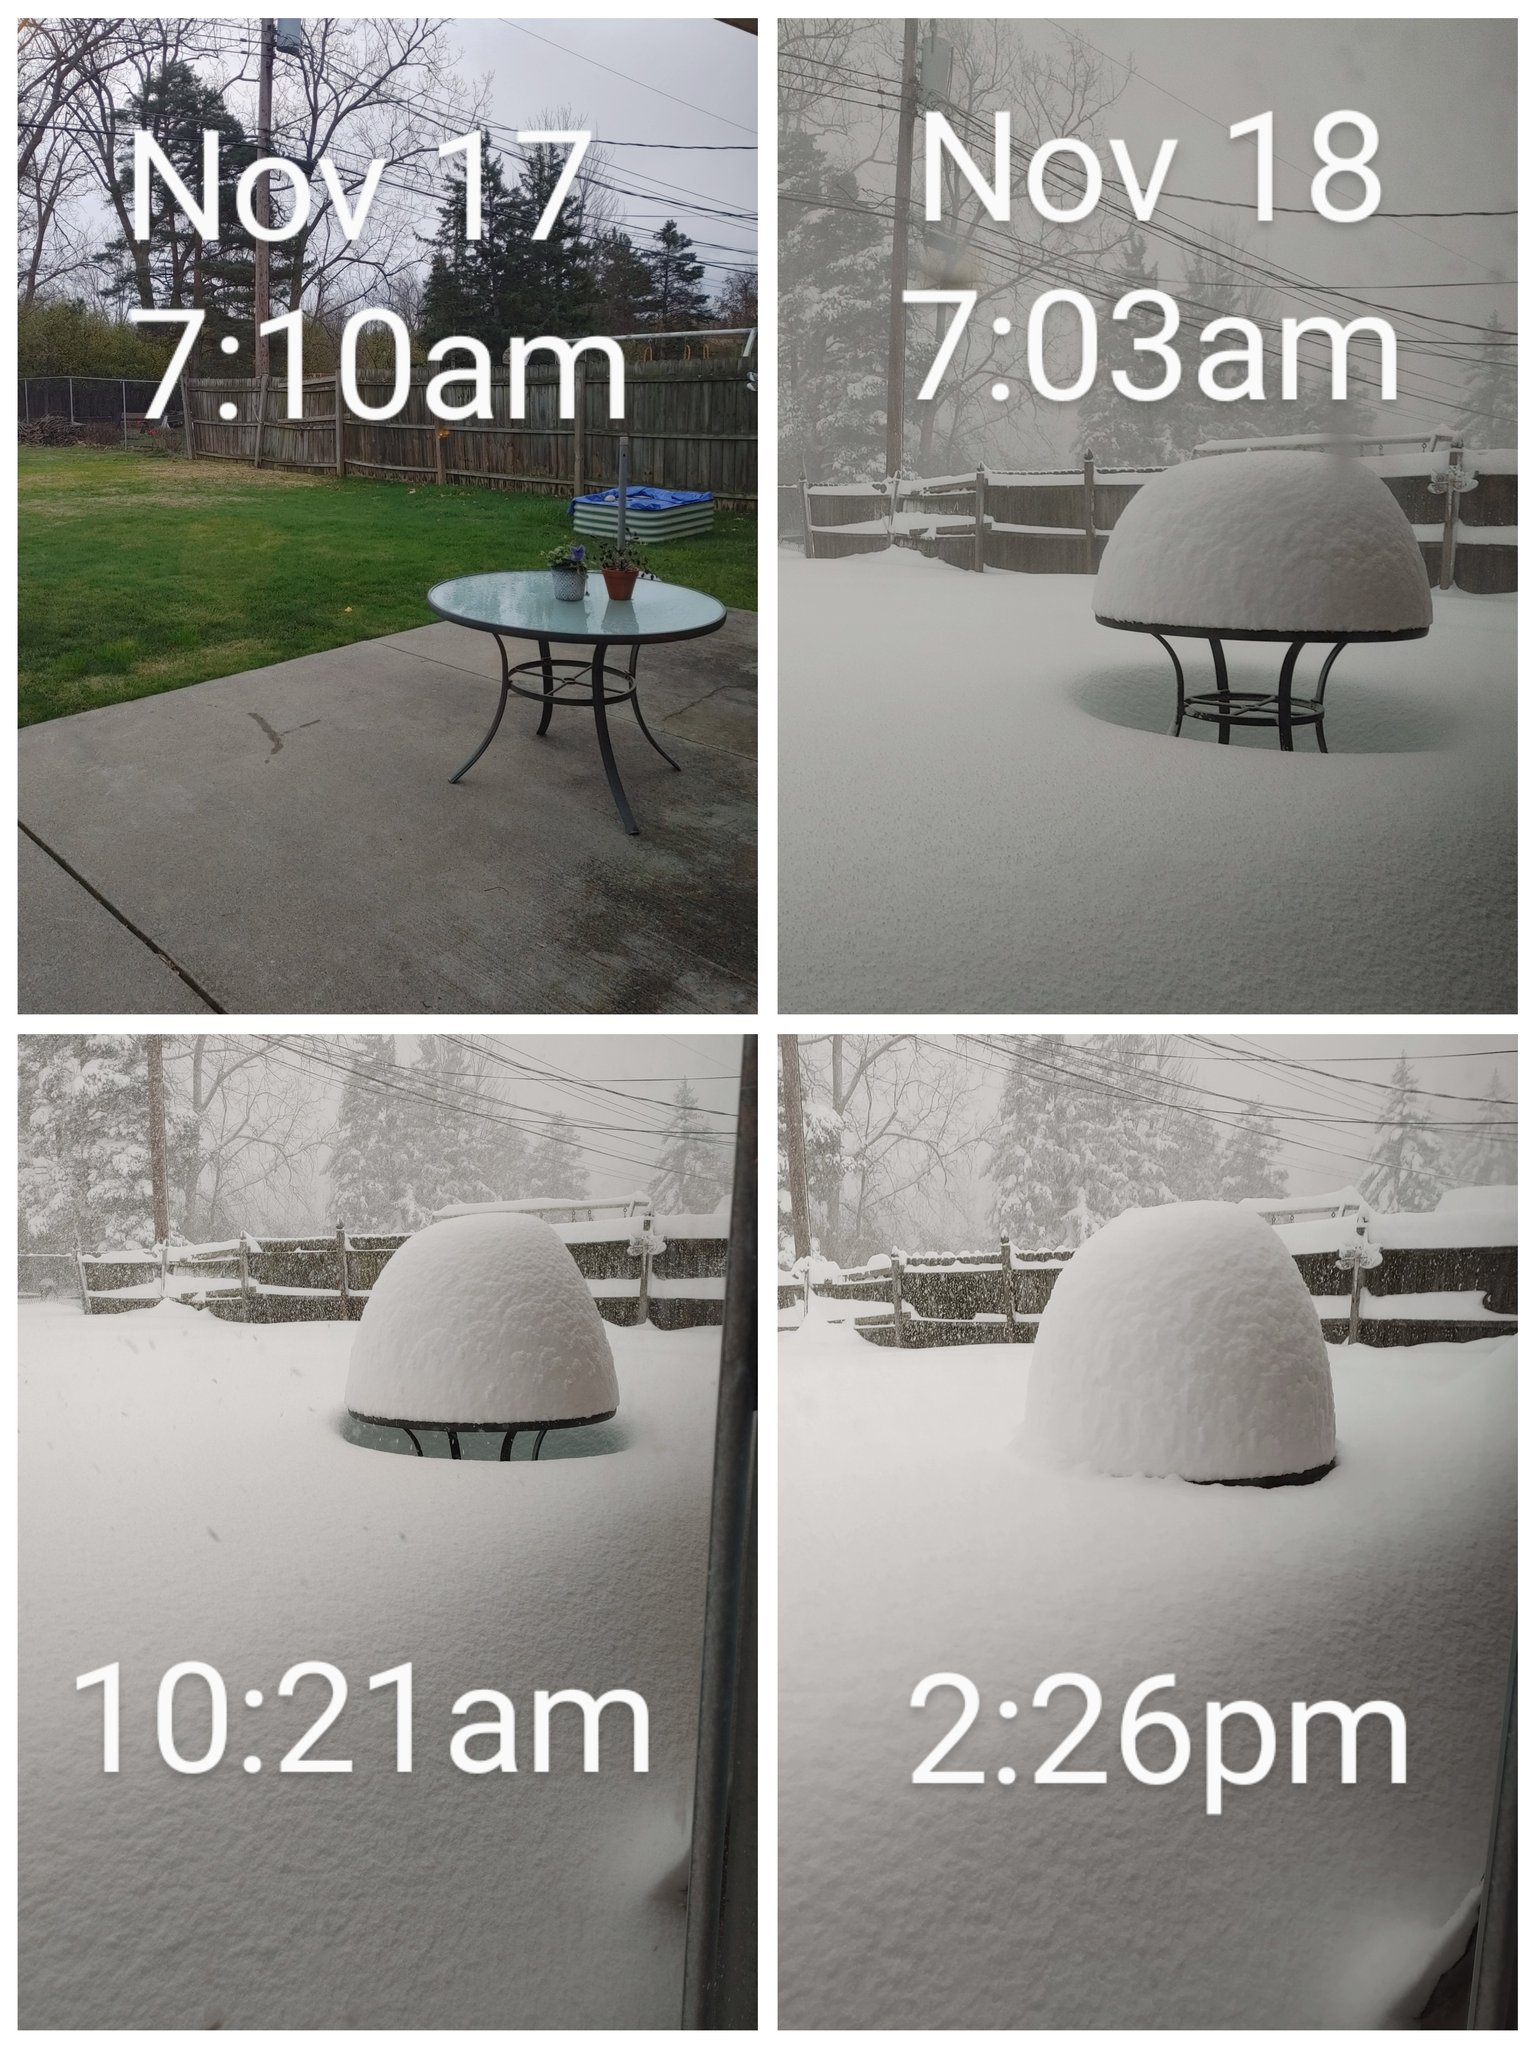 time lapse photos of snow accumulation in Buffalo, NY.